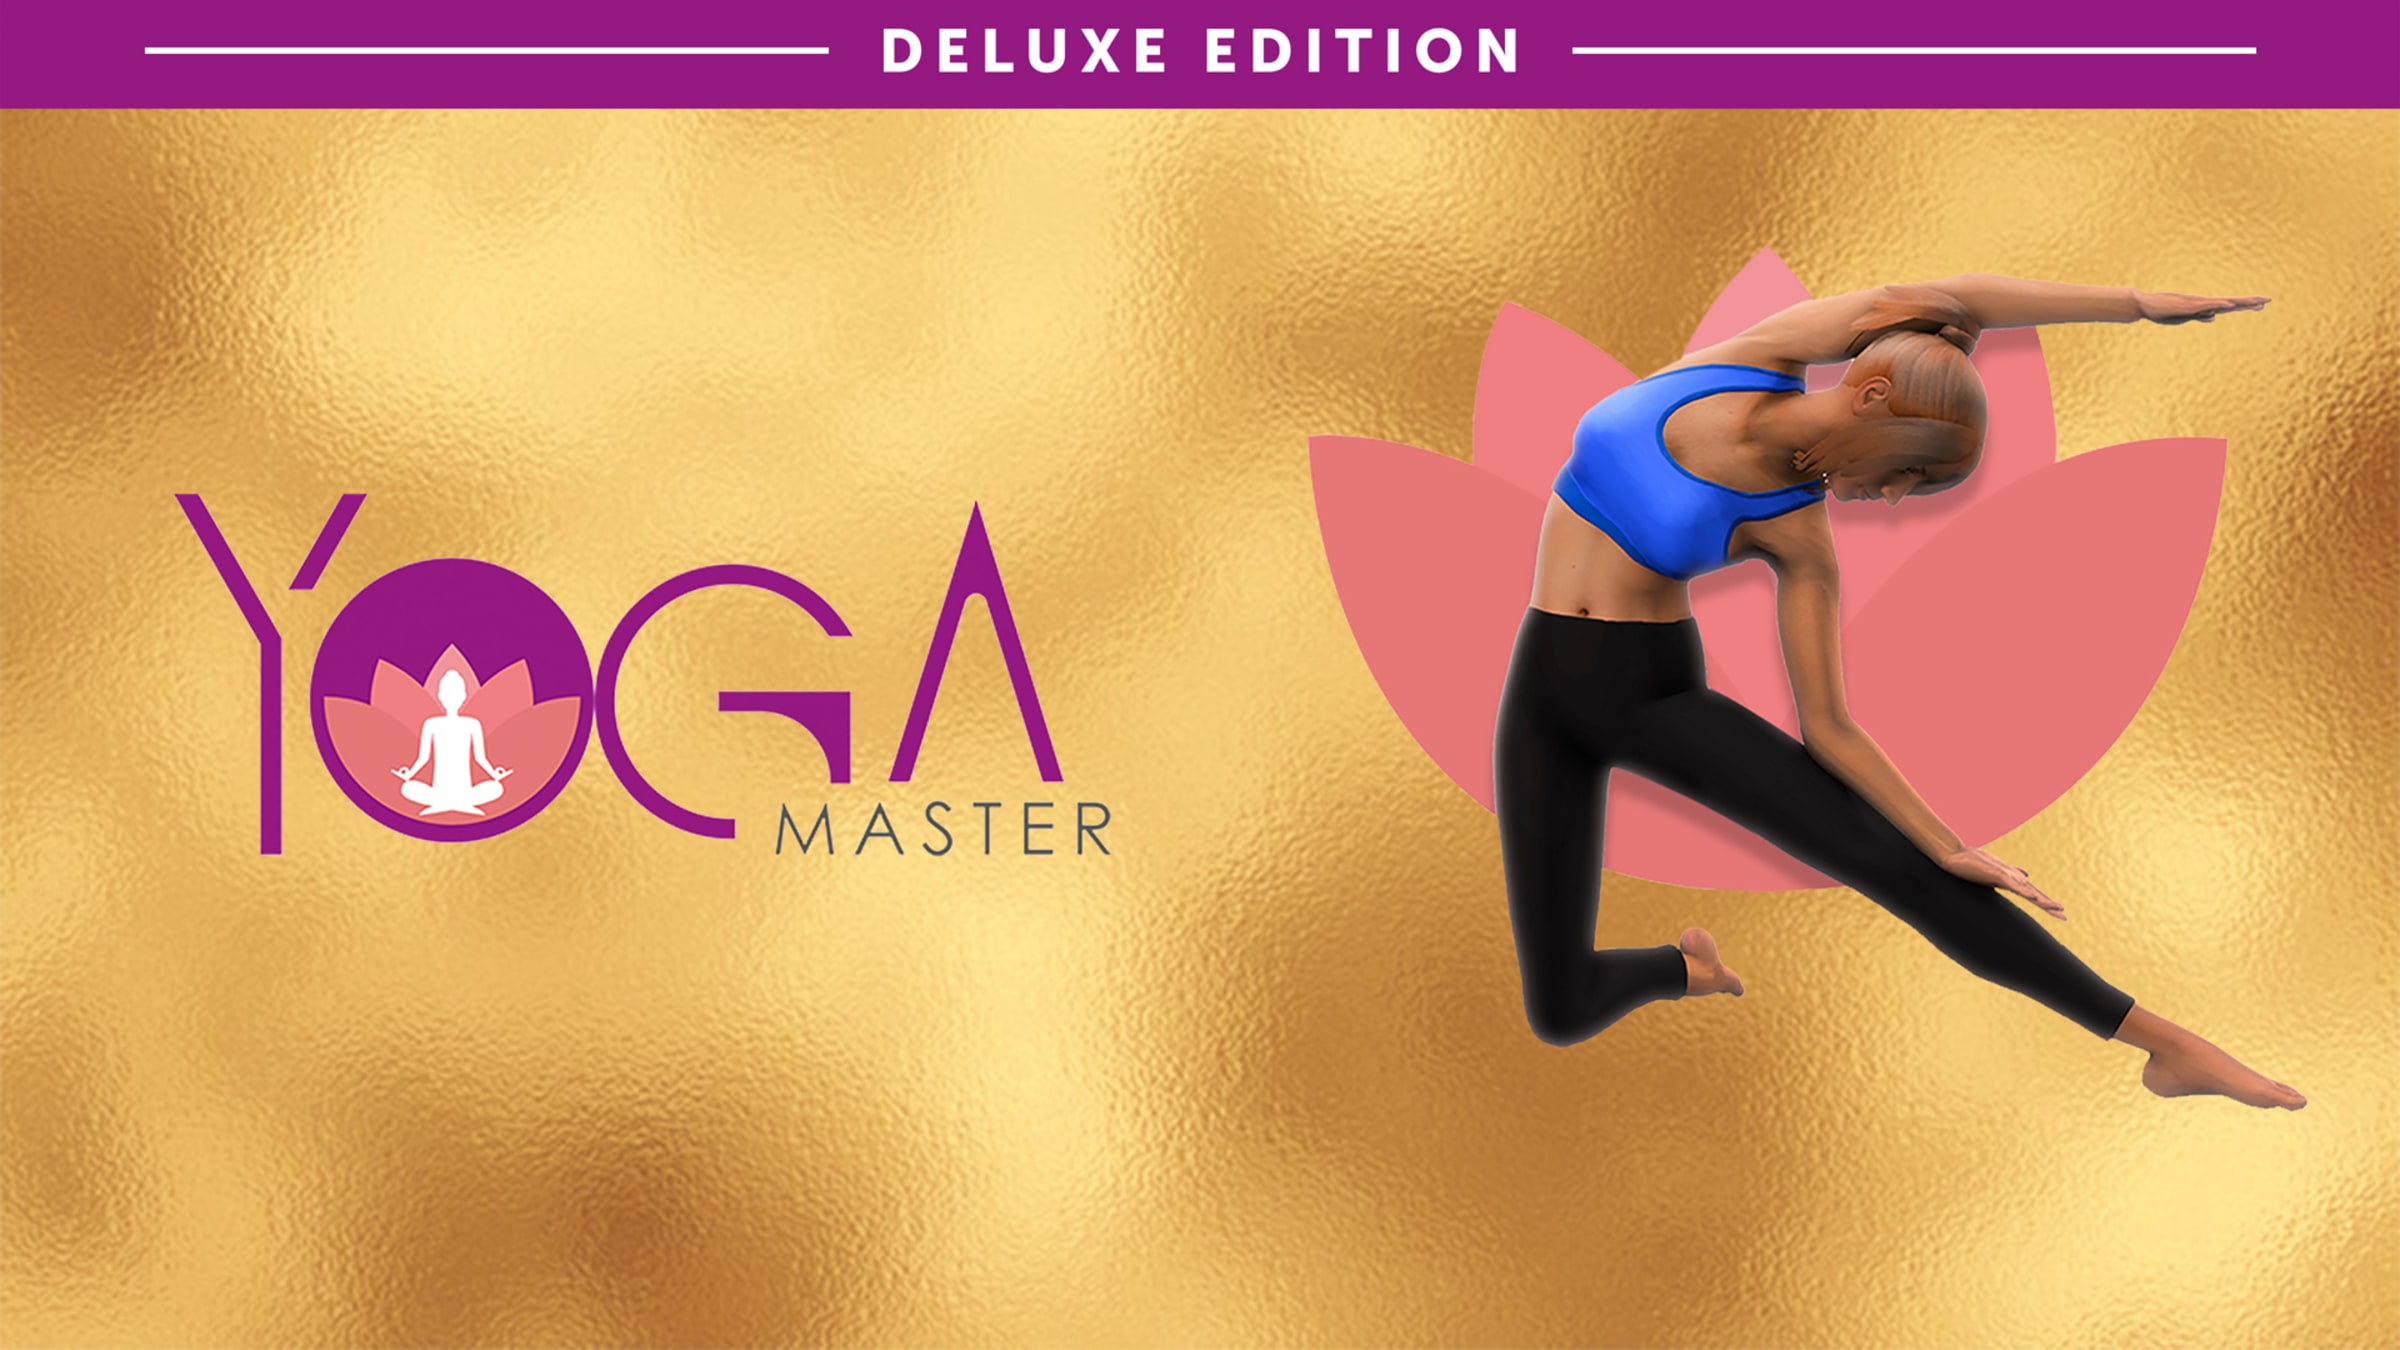 Yoga Master Deluxe Edition For Nintendo Switch Nintendo Official Site